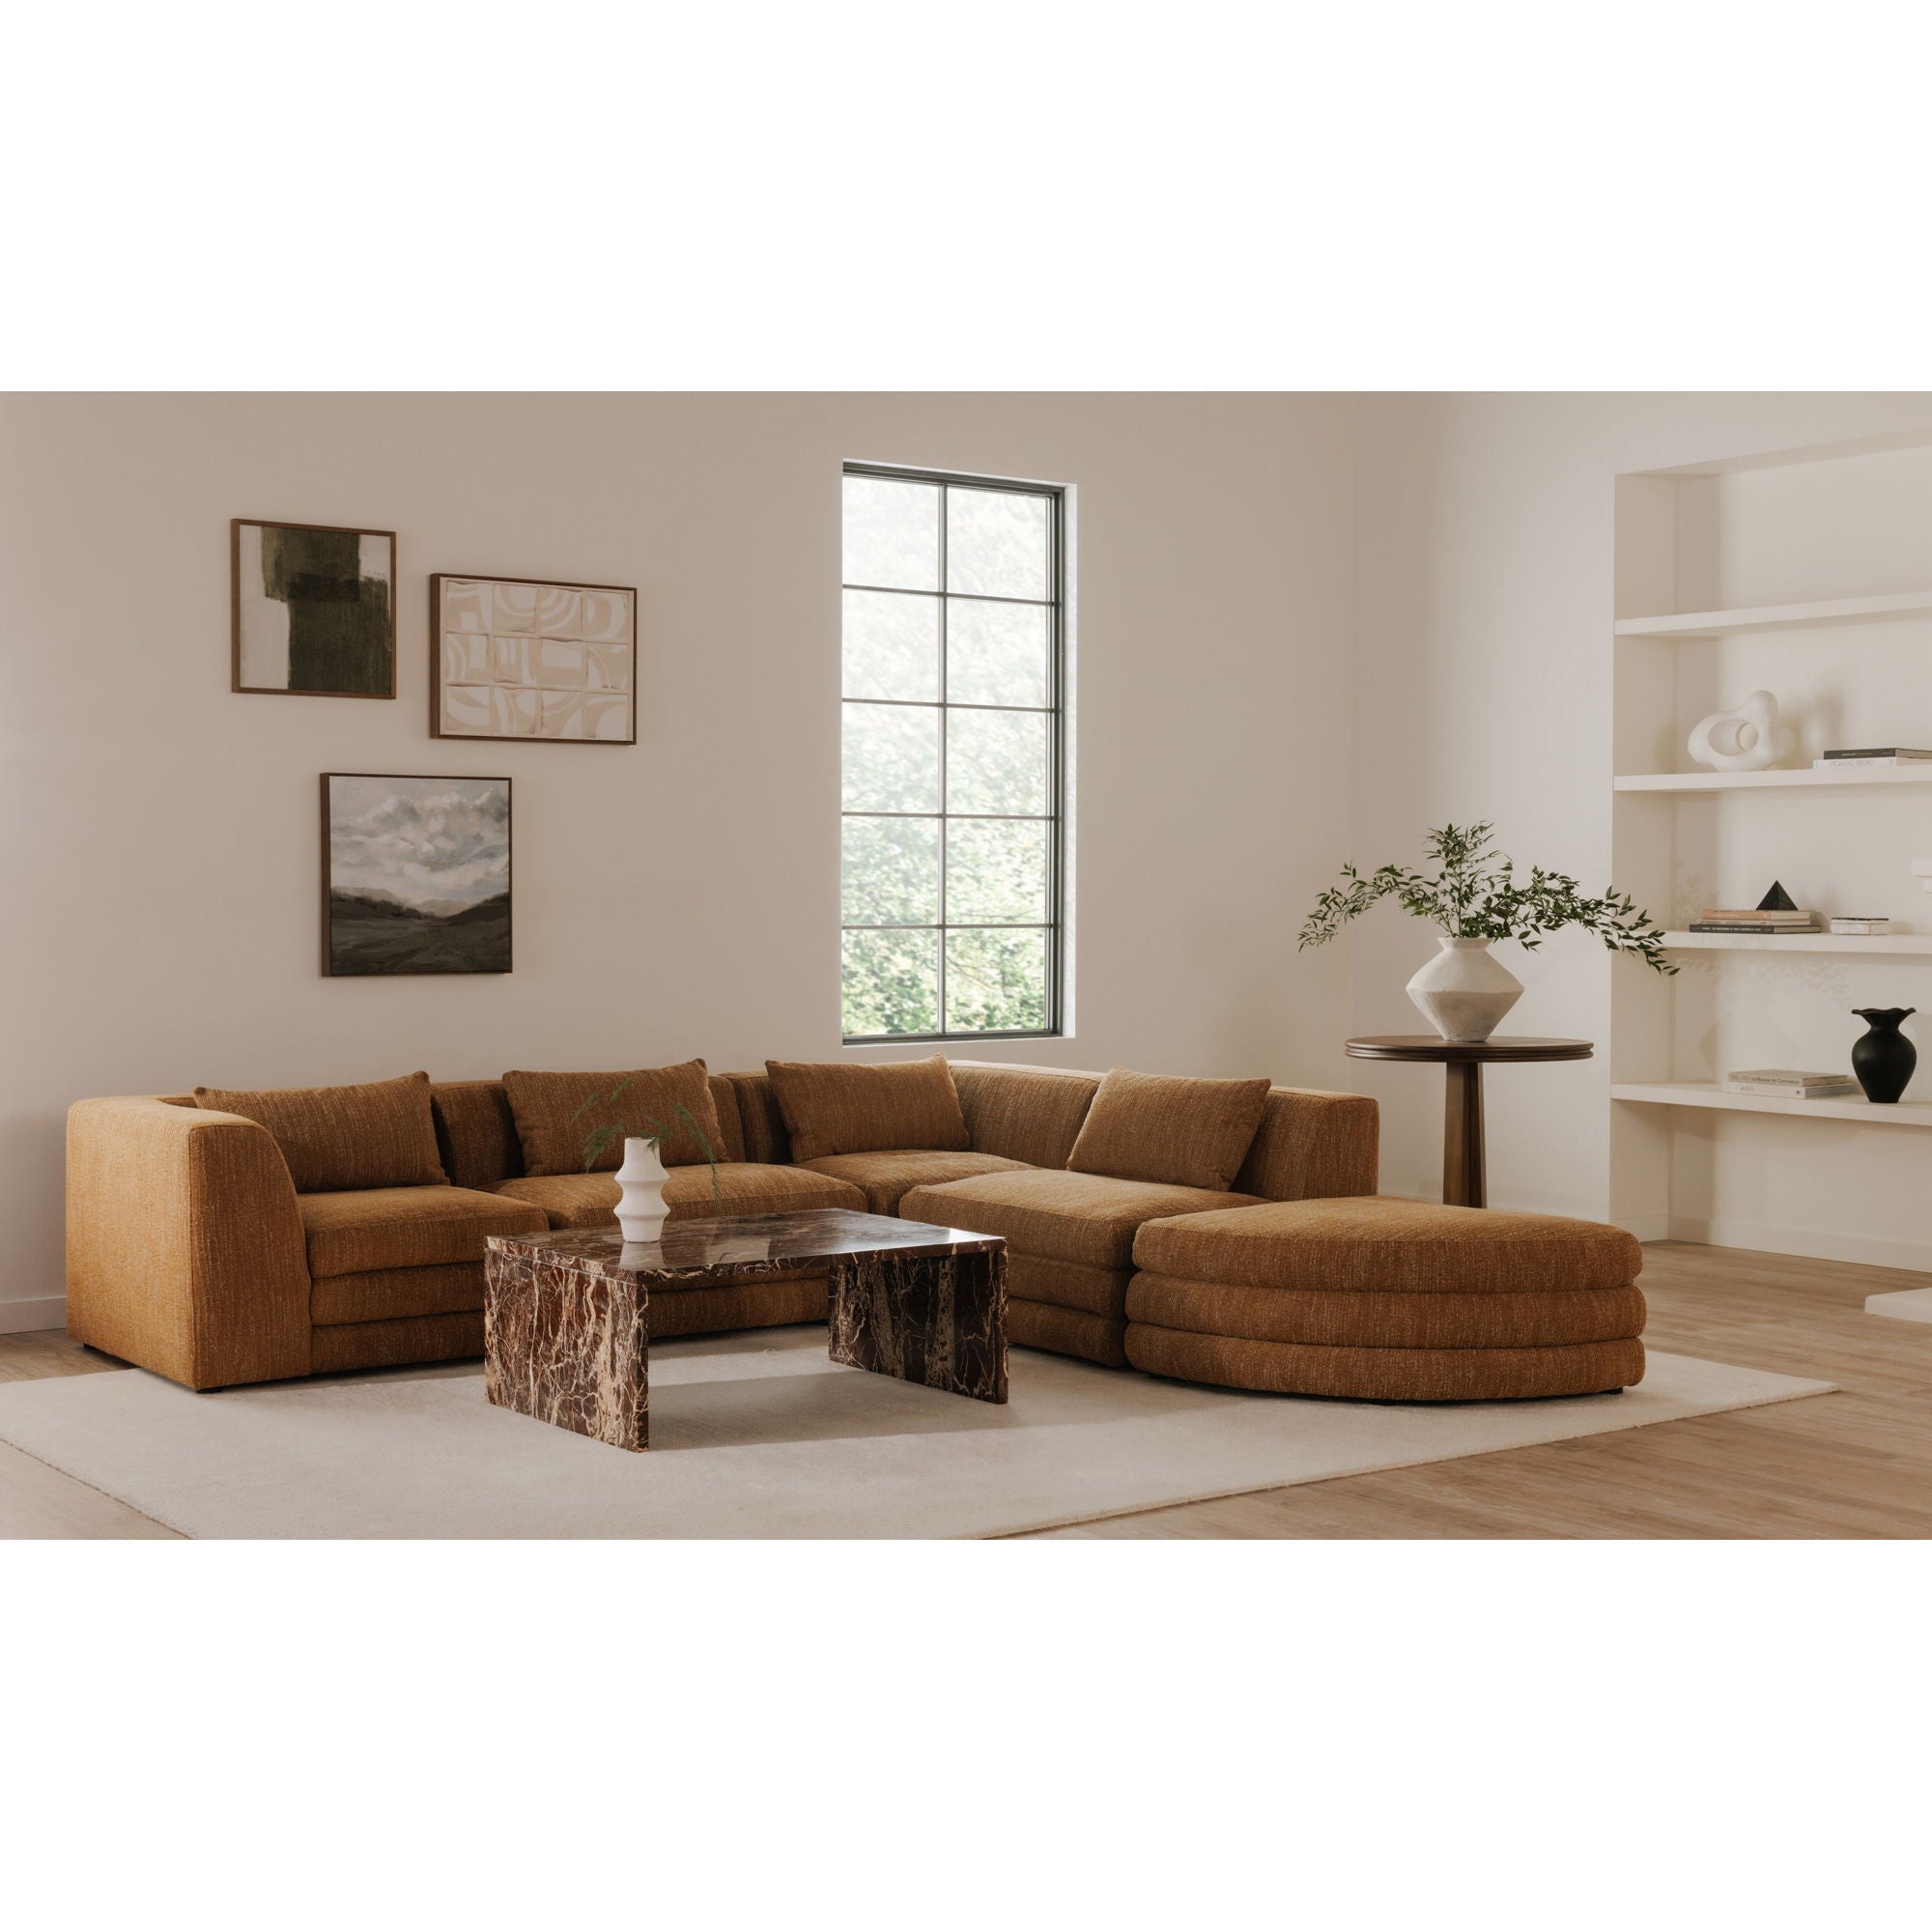 Lowtide - Alcove Modular Configuration - Amber Glow-Stationary Sectionals-American Furniture Outlet